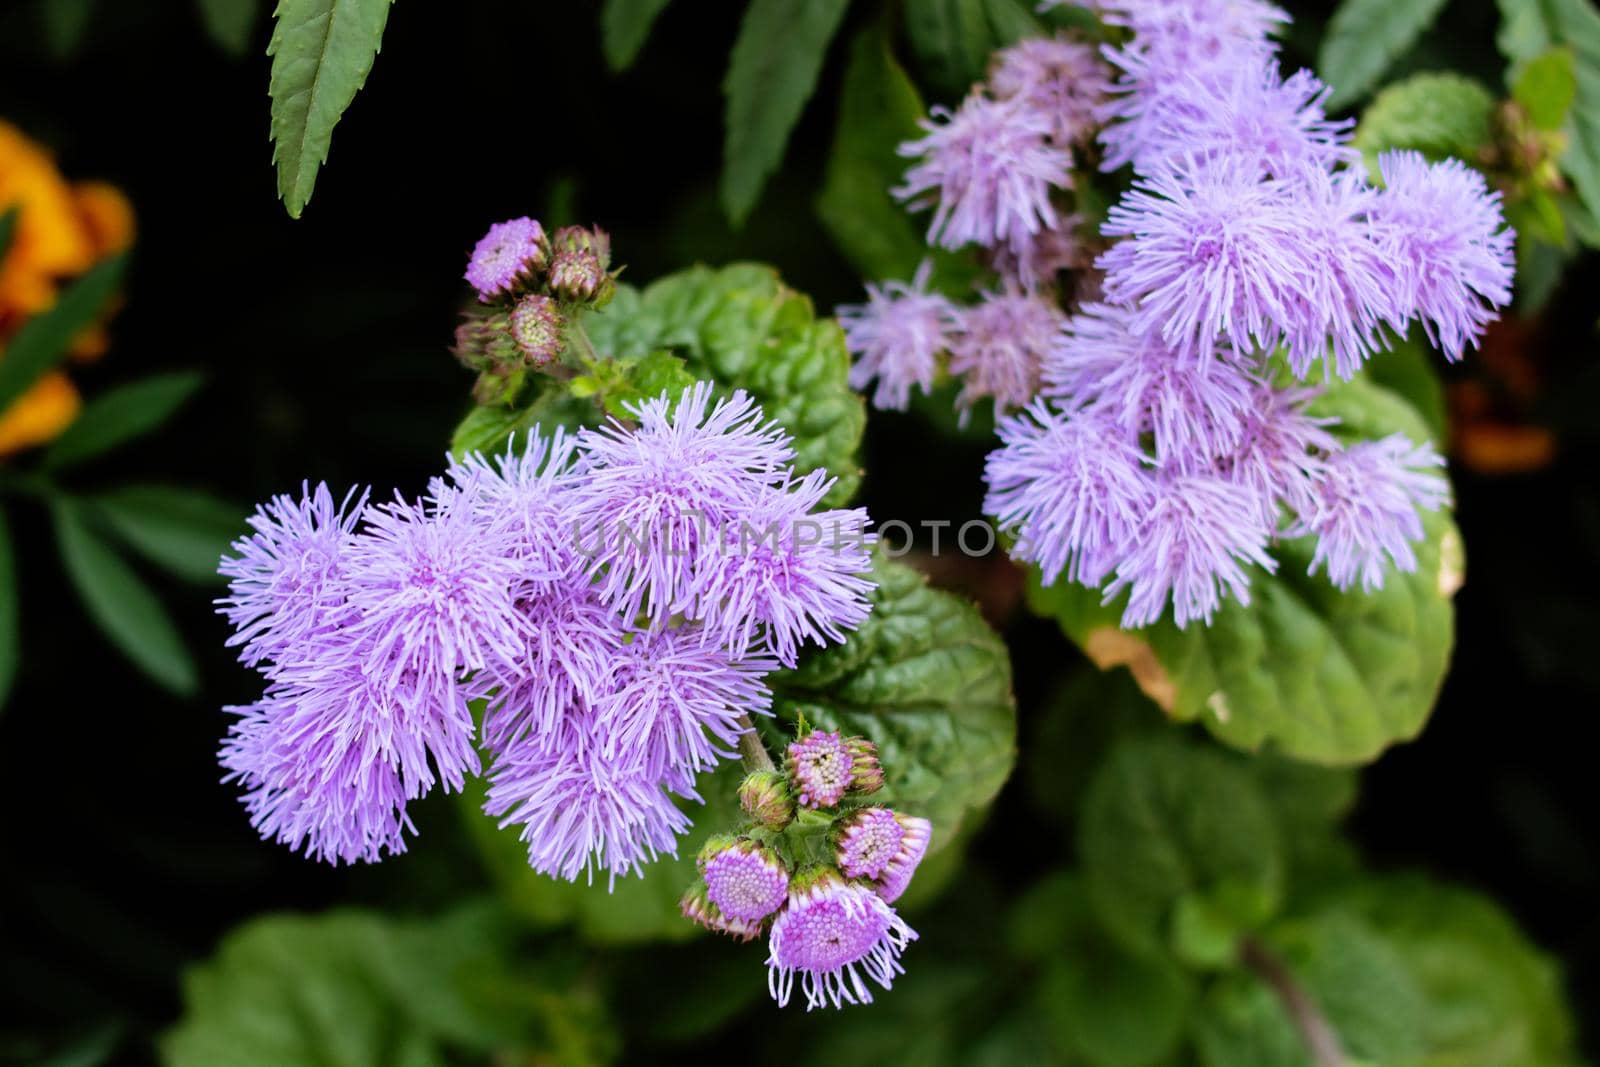 Purple ageratum flowers among green leaves close up